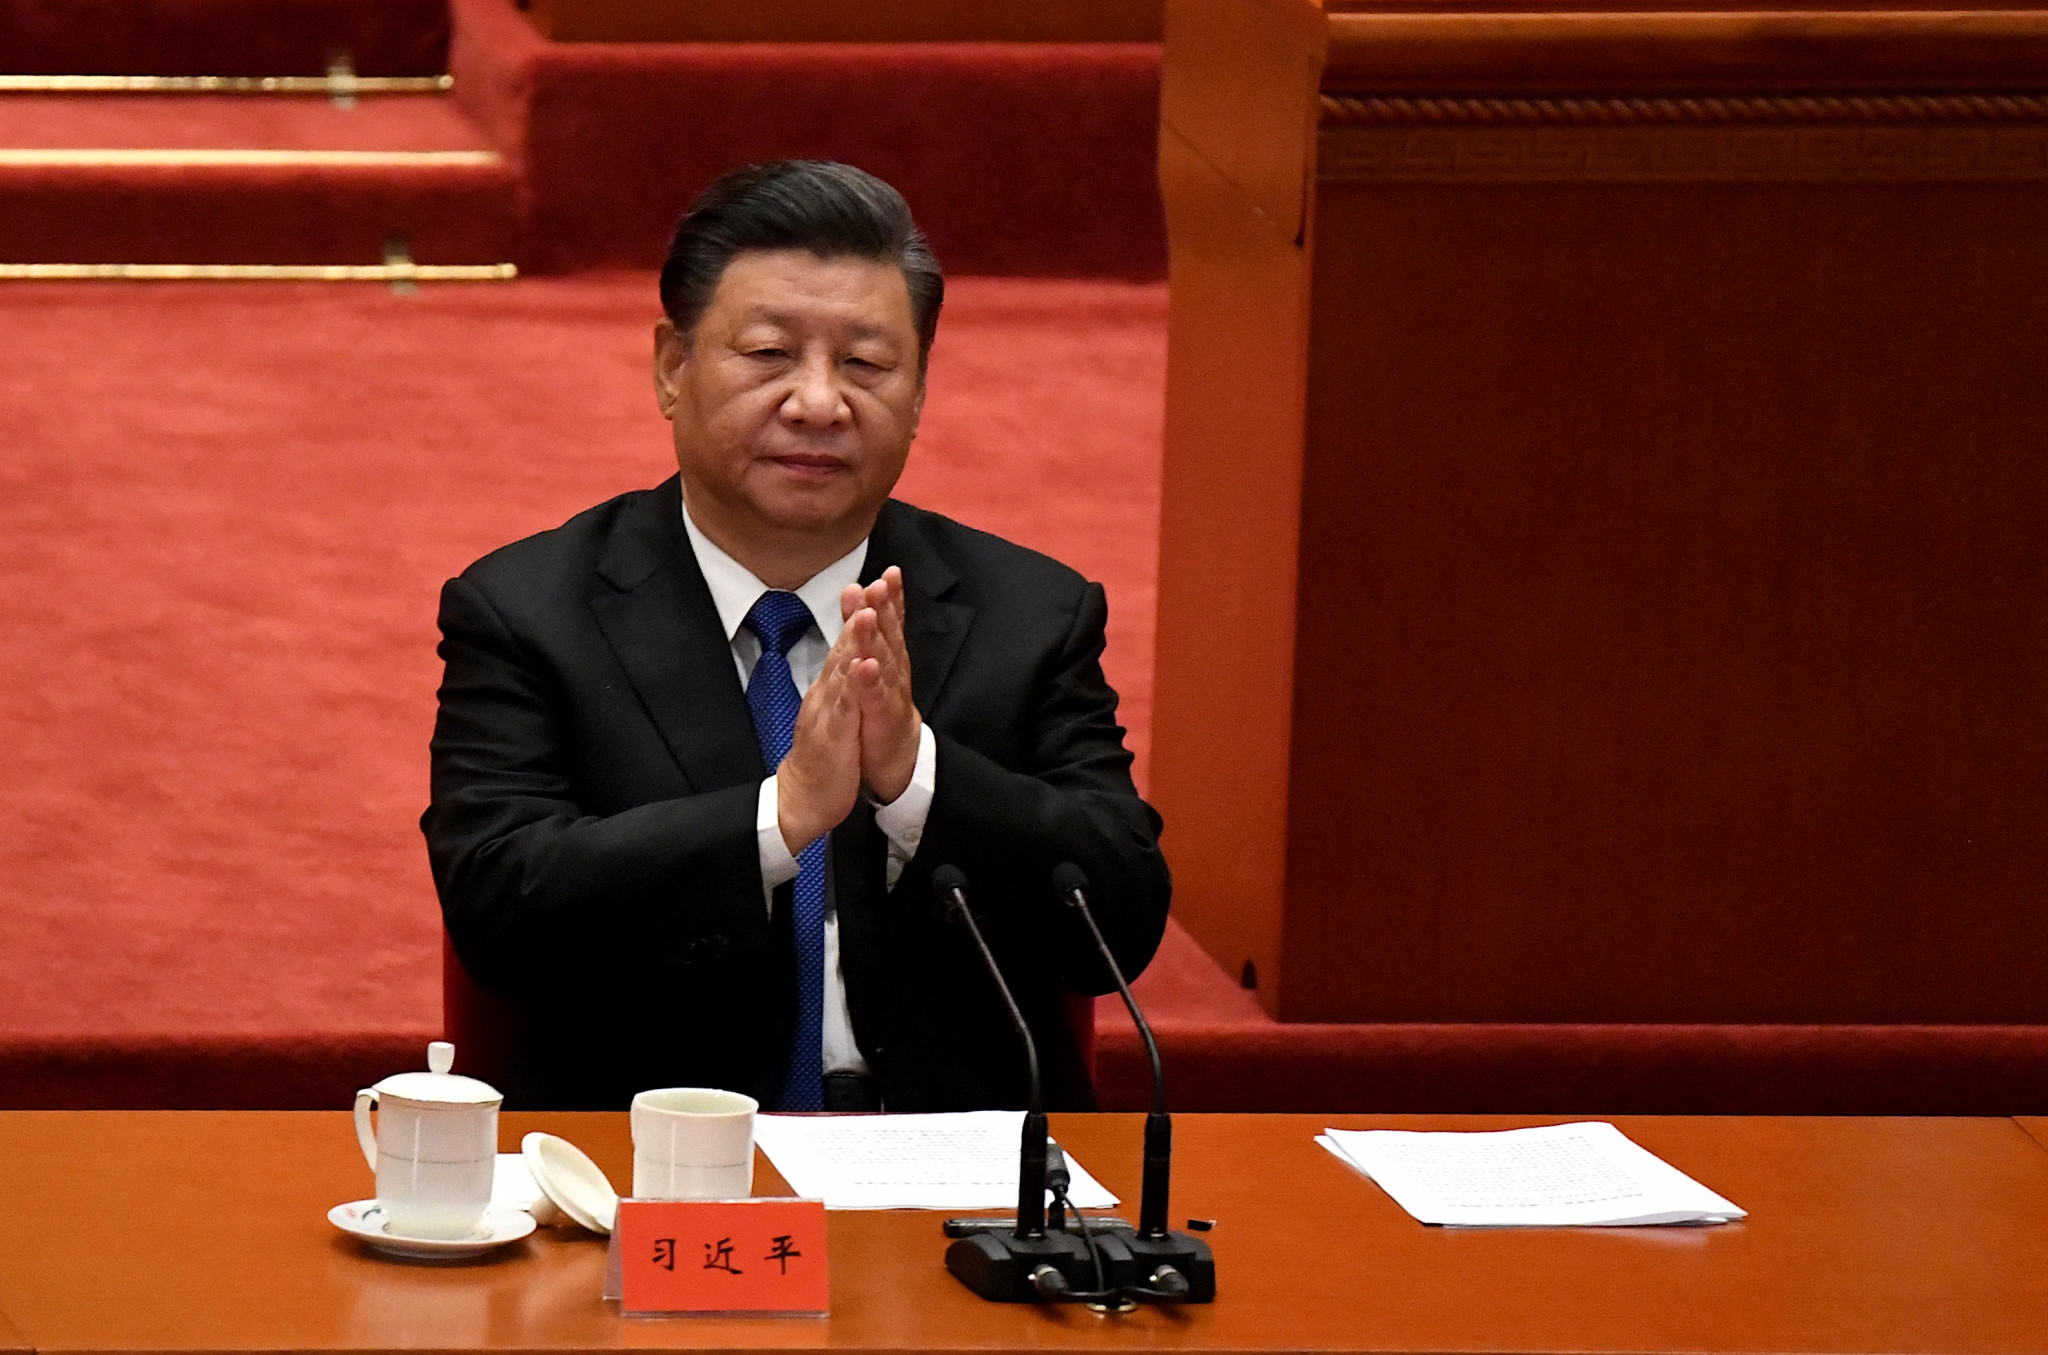 China’s President Xi Jinping could participate in a virtual summit with Joe Biden in the coming weeks ©Getty Images